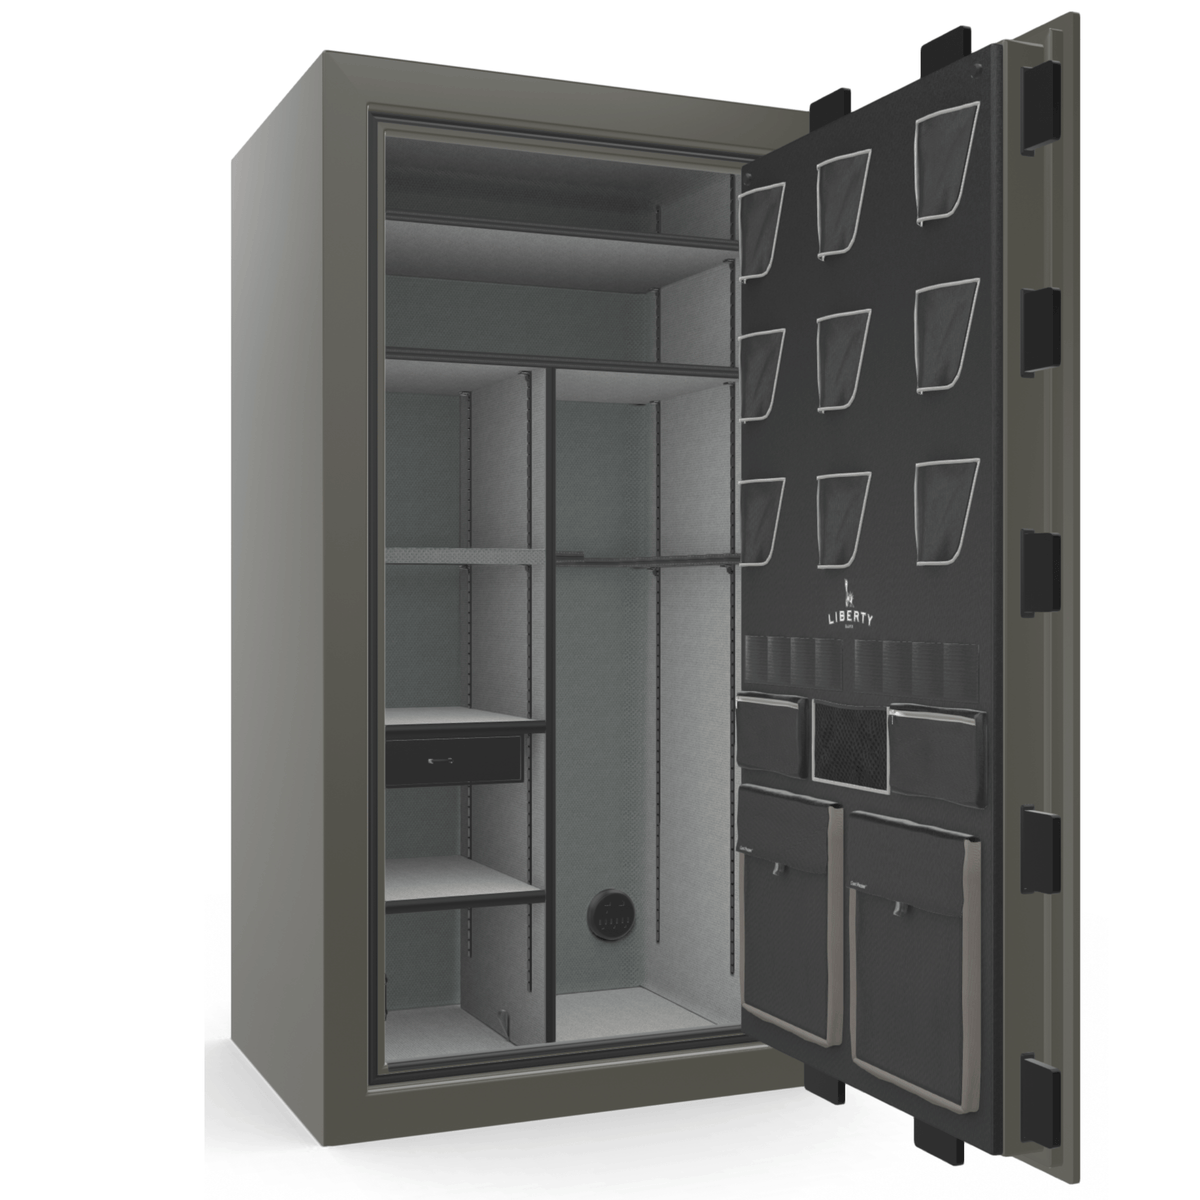 Liberty Safe Classic Plus 40 in Feathered Gray Gloss, open door.